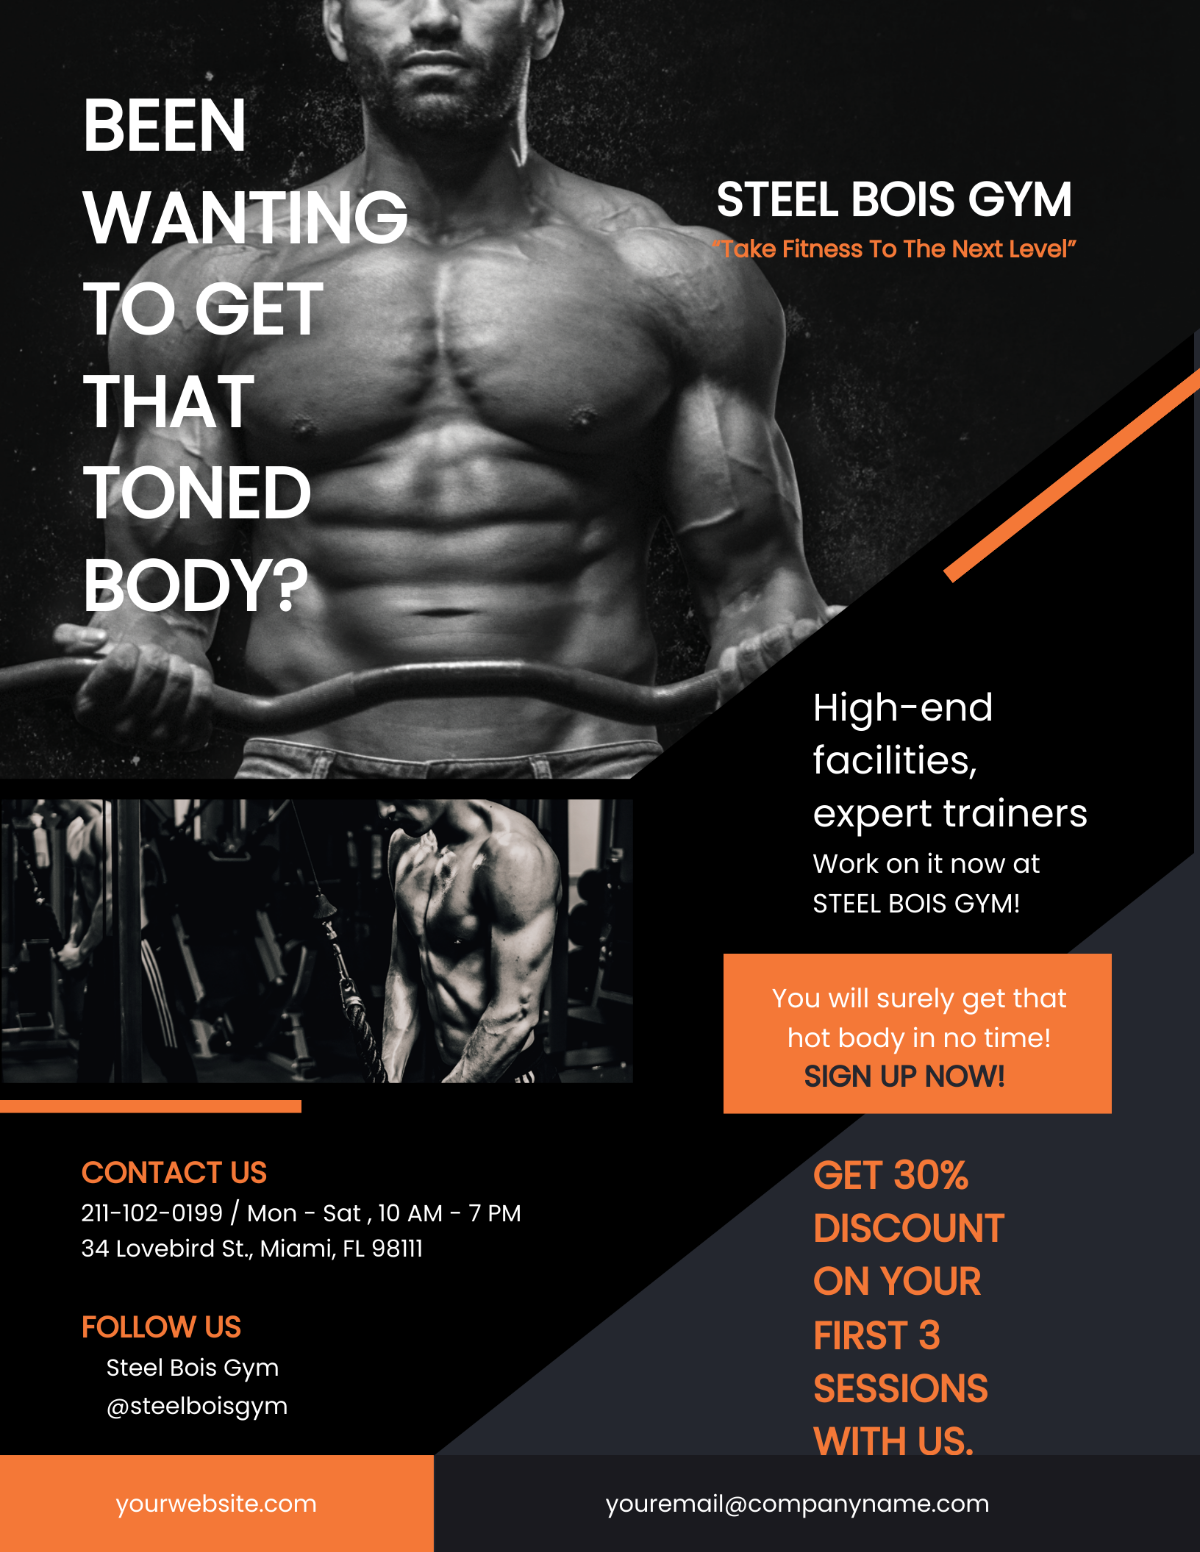 Fitness Gym Business Promotion Flyer Template